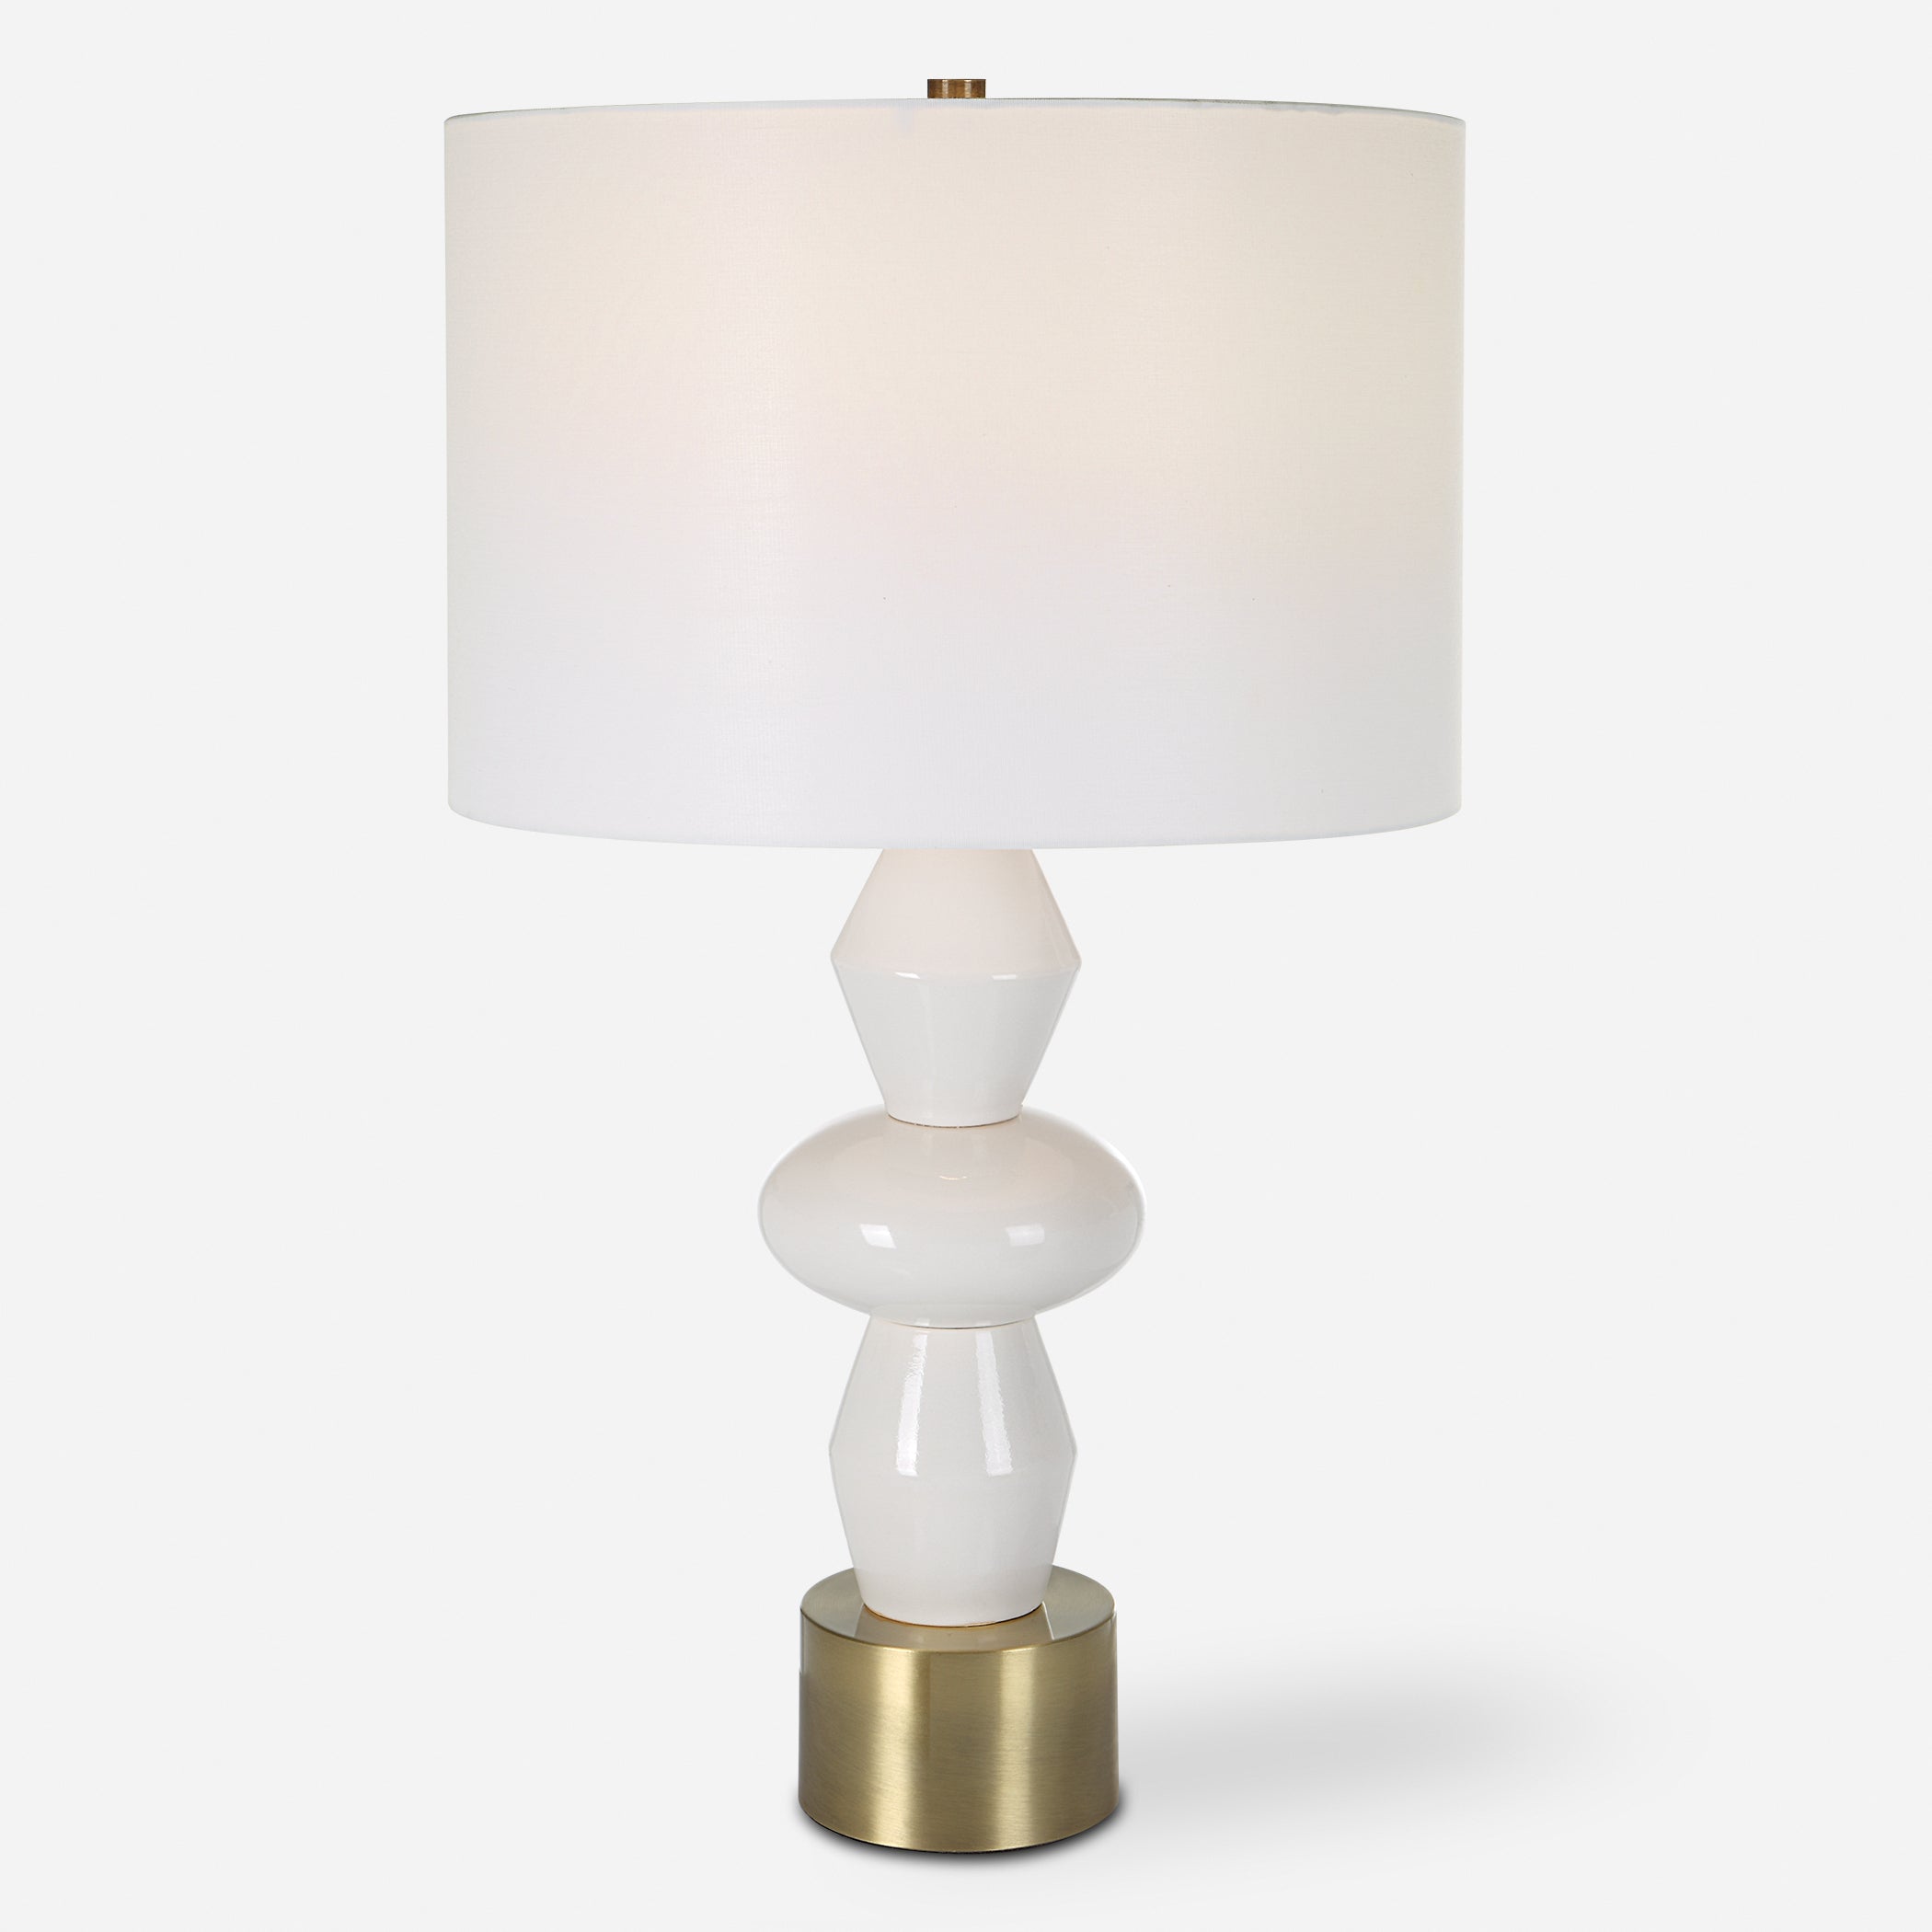 Uttermost Architect Table Lamp